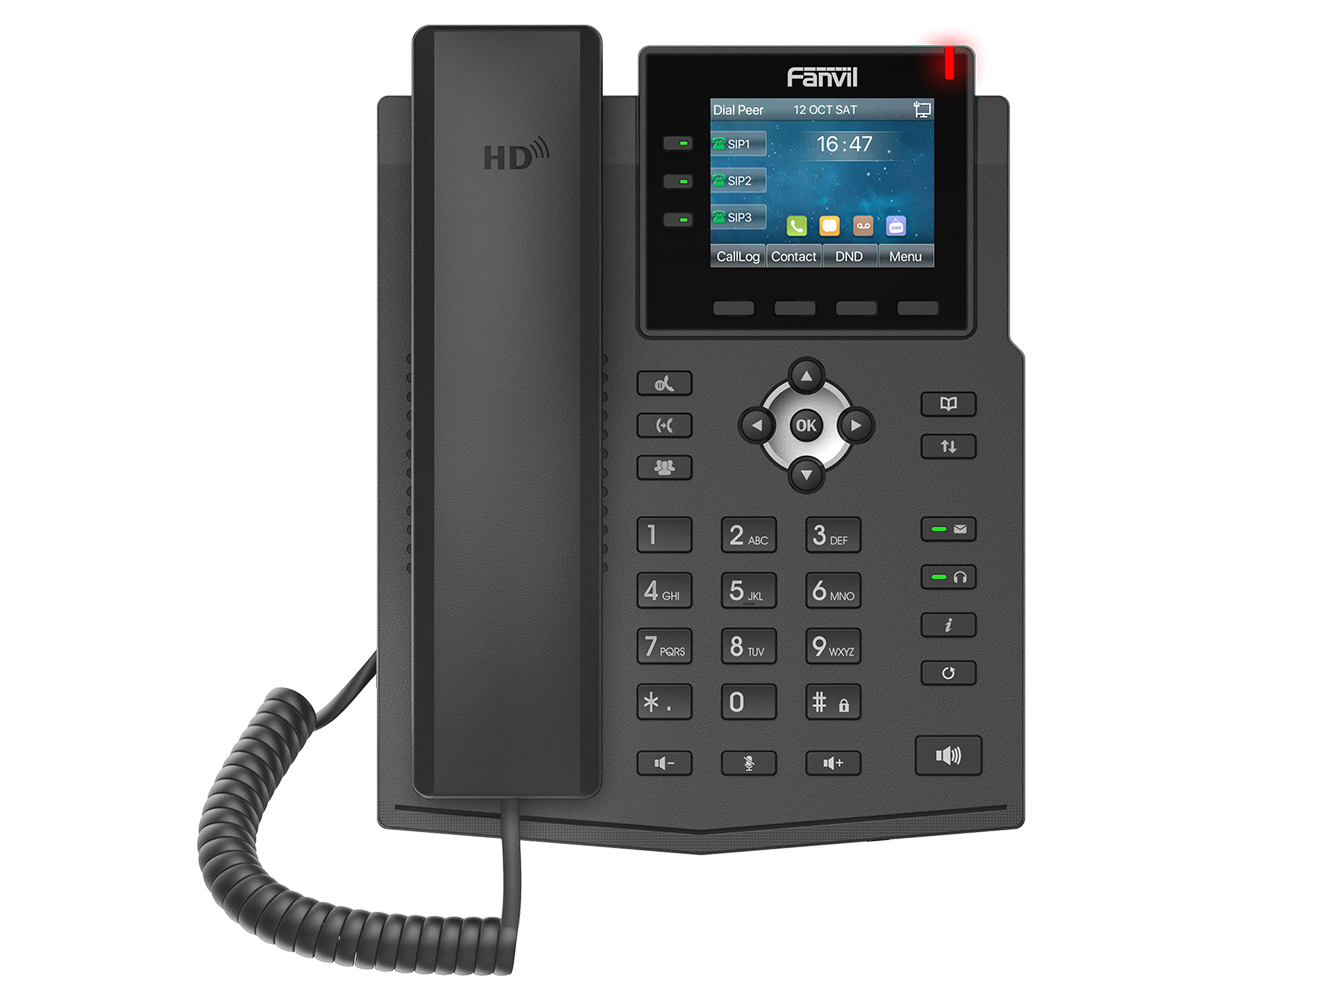 What is the capacity of SIP lines supported by the Fanvil X3U Pro Entry-level Gigabit VoIP Phone?